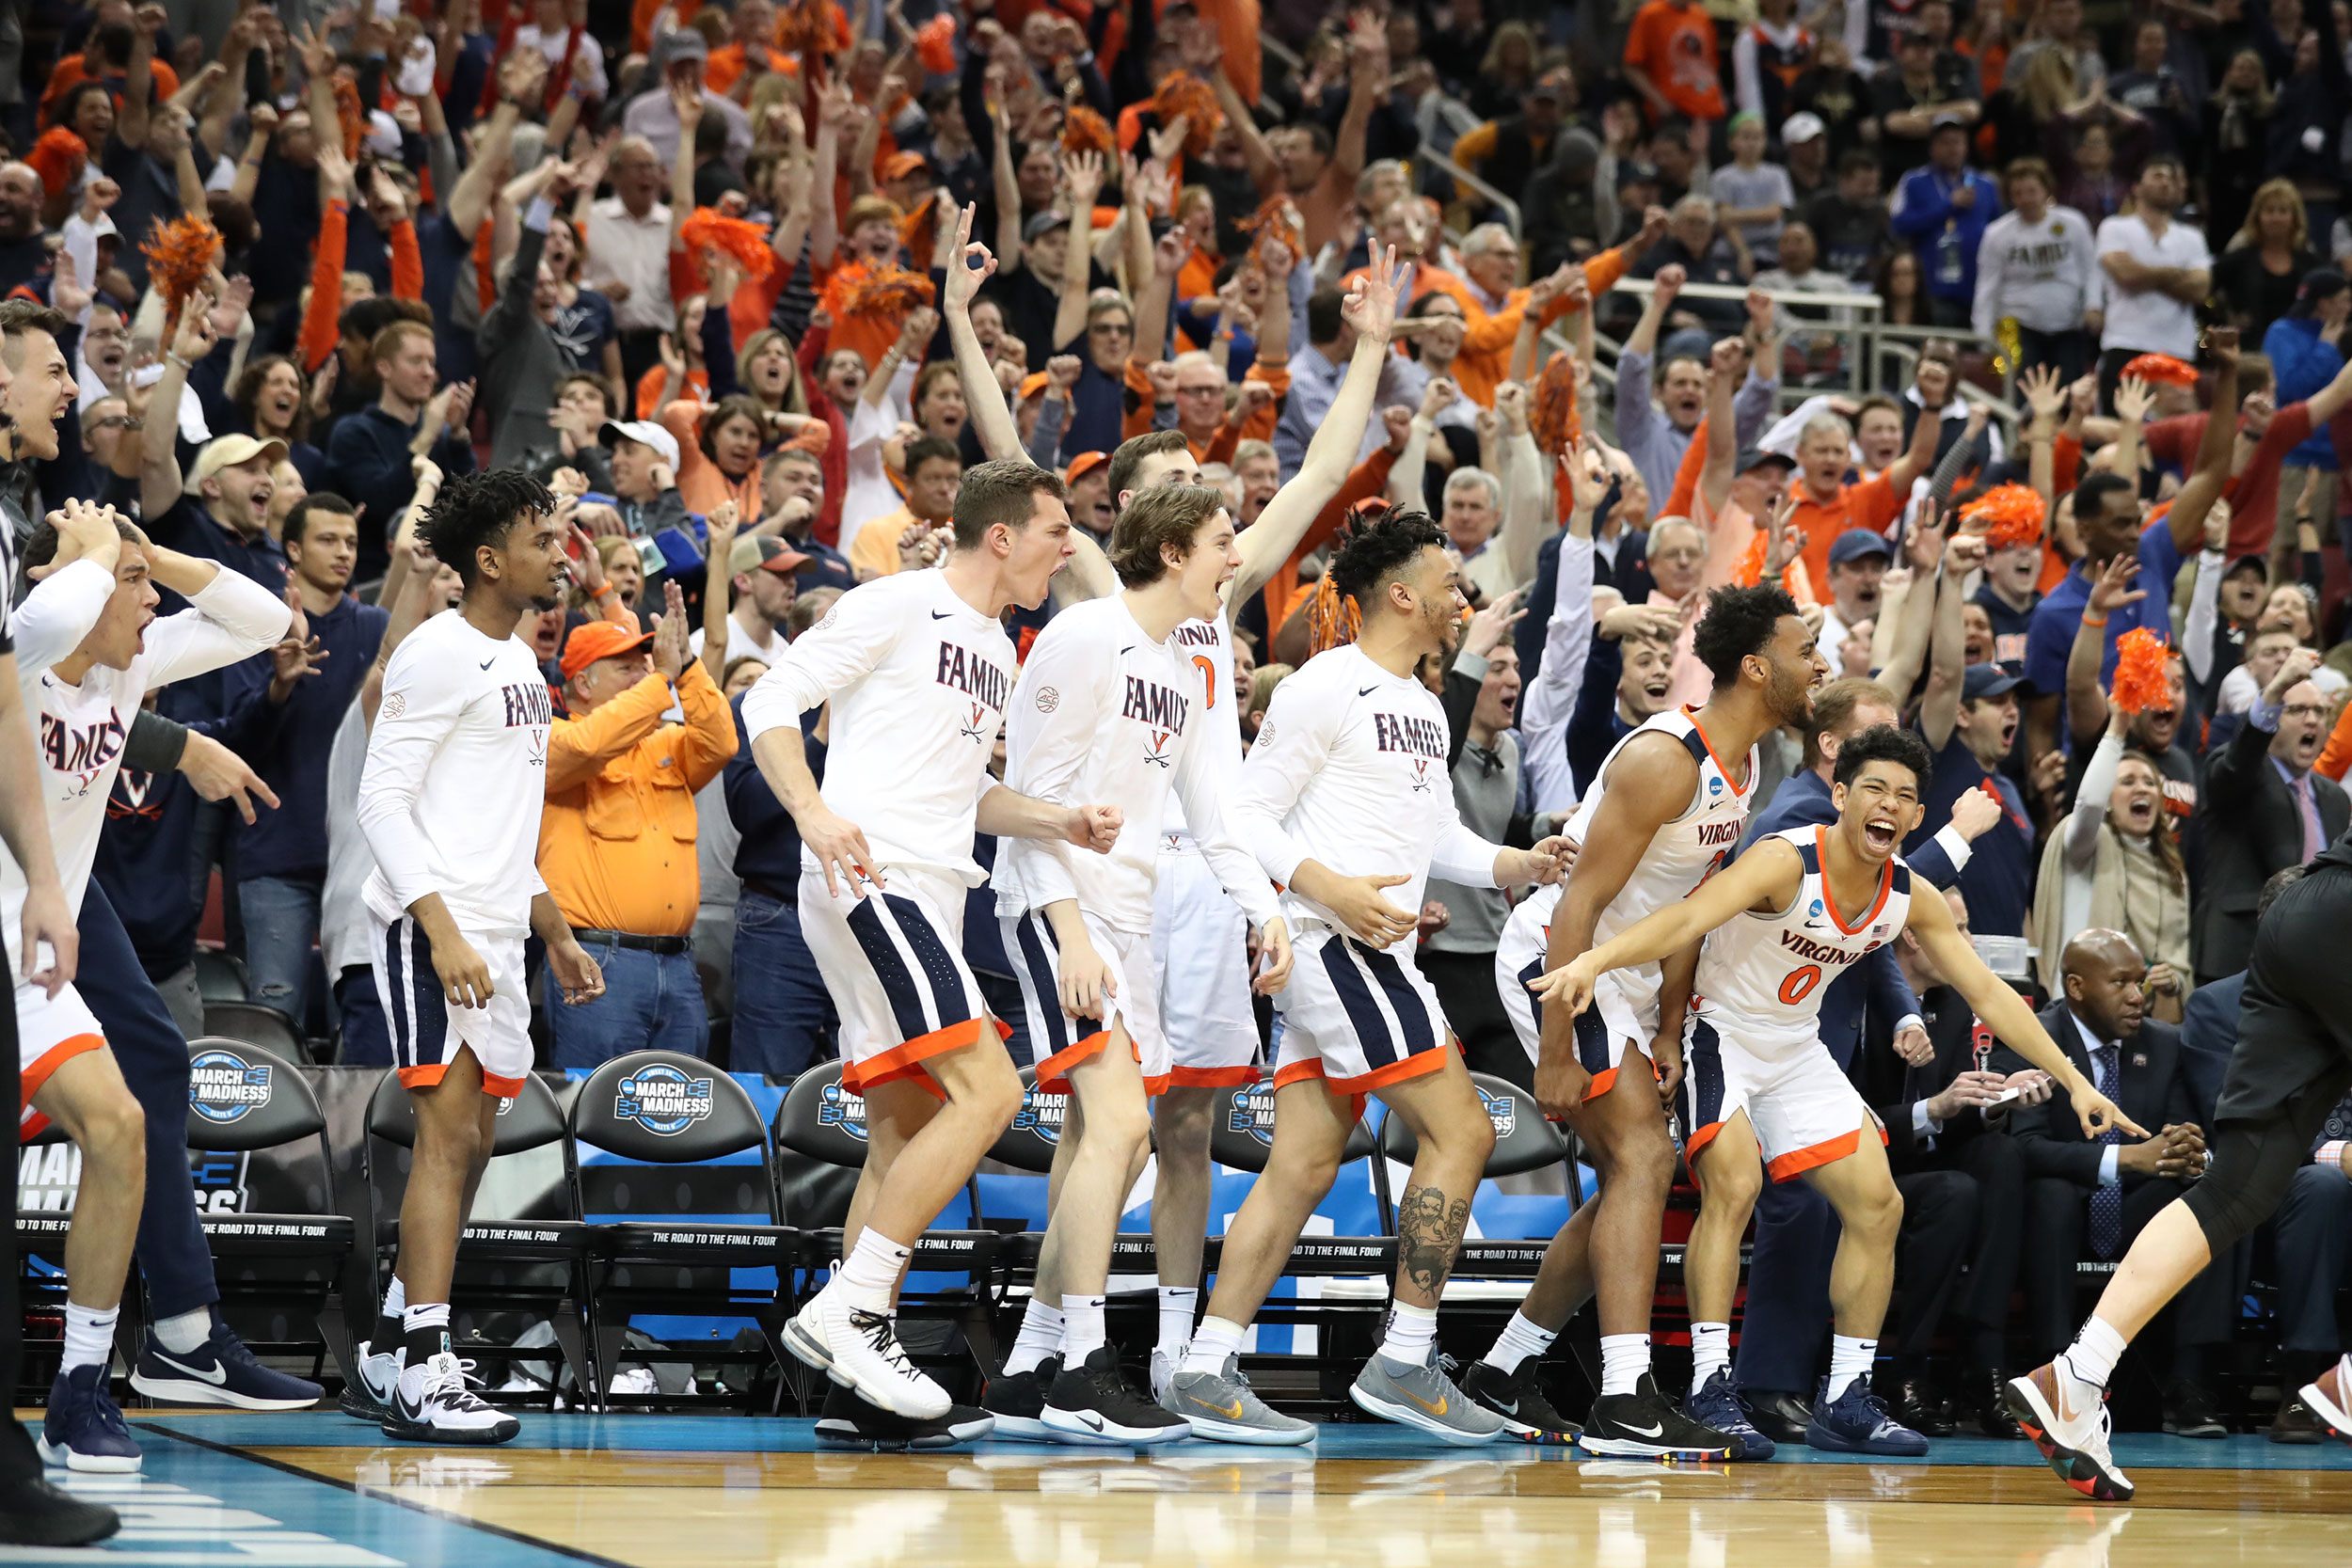 UVA basketball team and crowd erupts in cheers